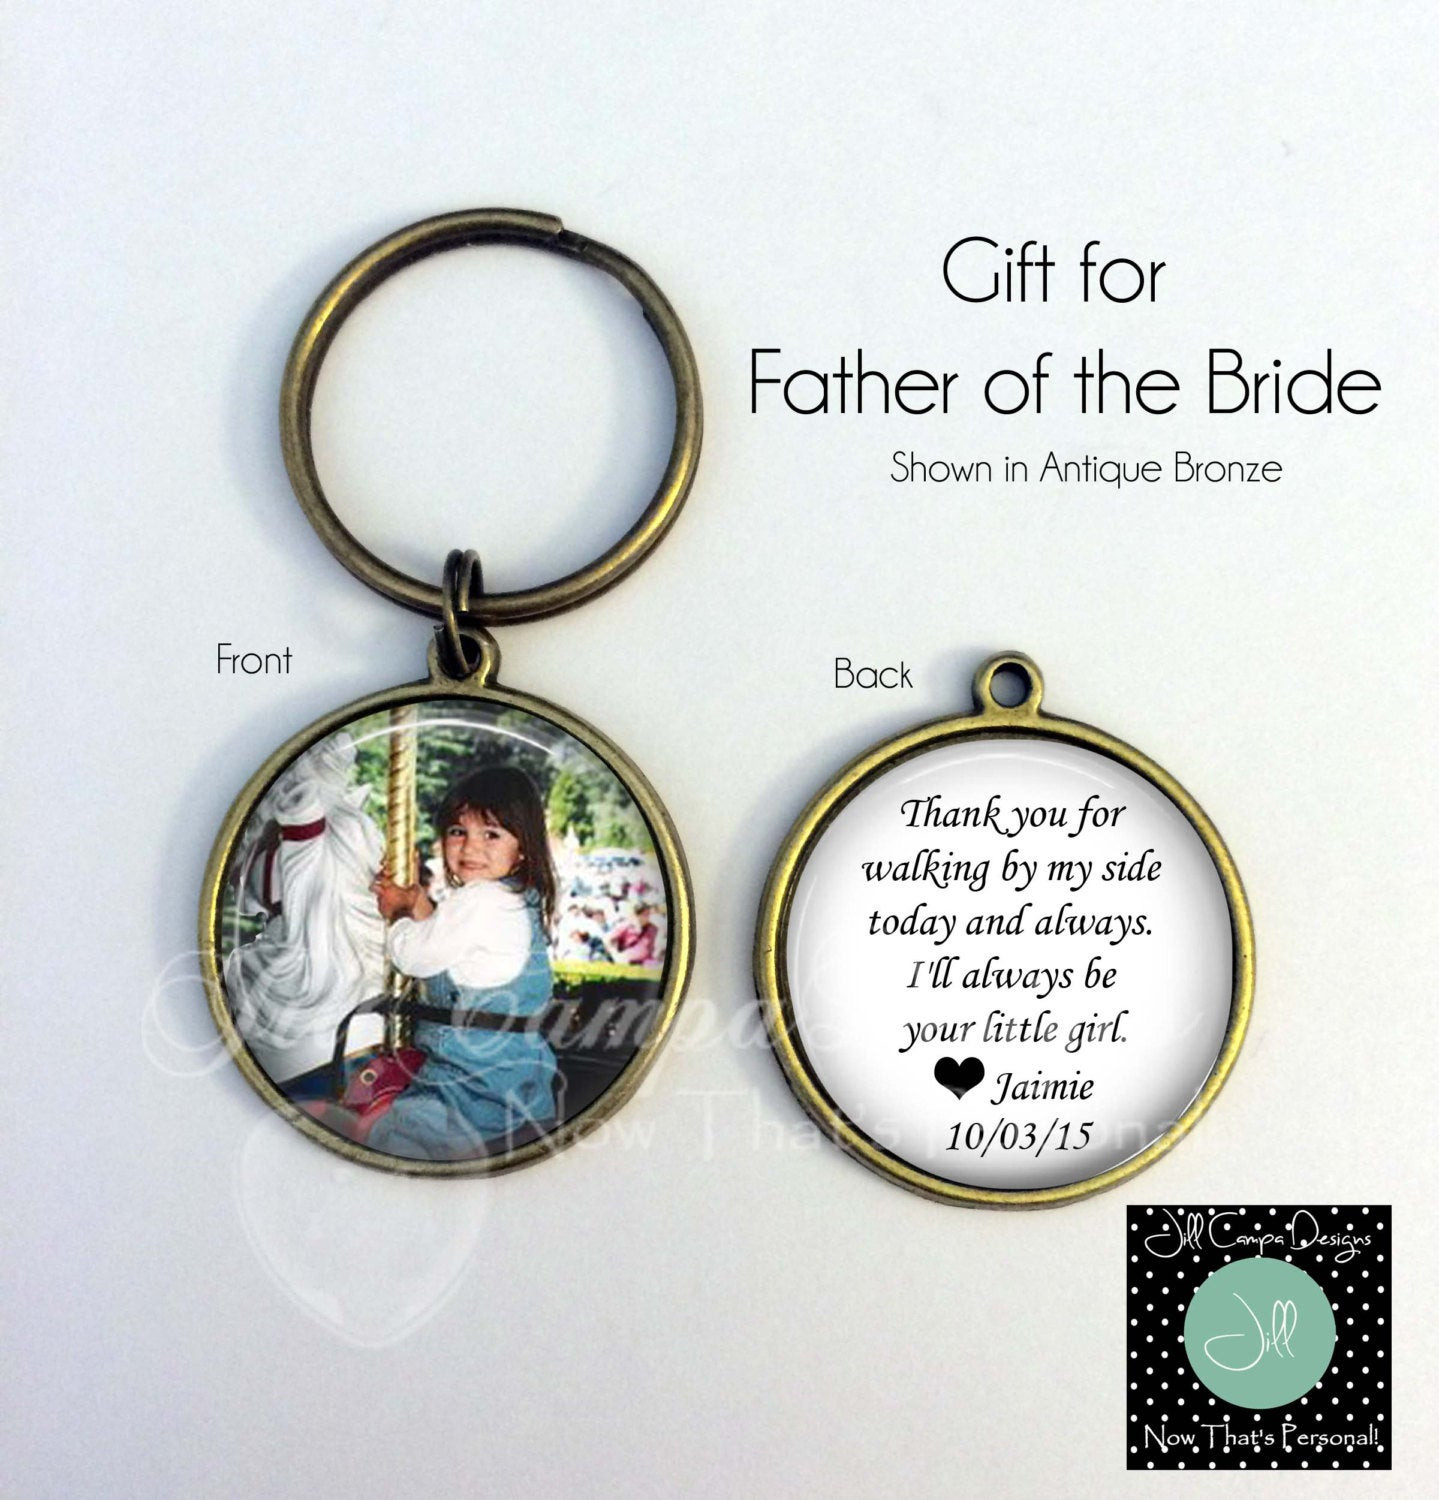 Father Of Bride Gift Ideas
 FATHER of the BRIDE GIFT Stepfather of the Bride t